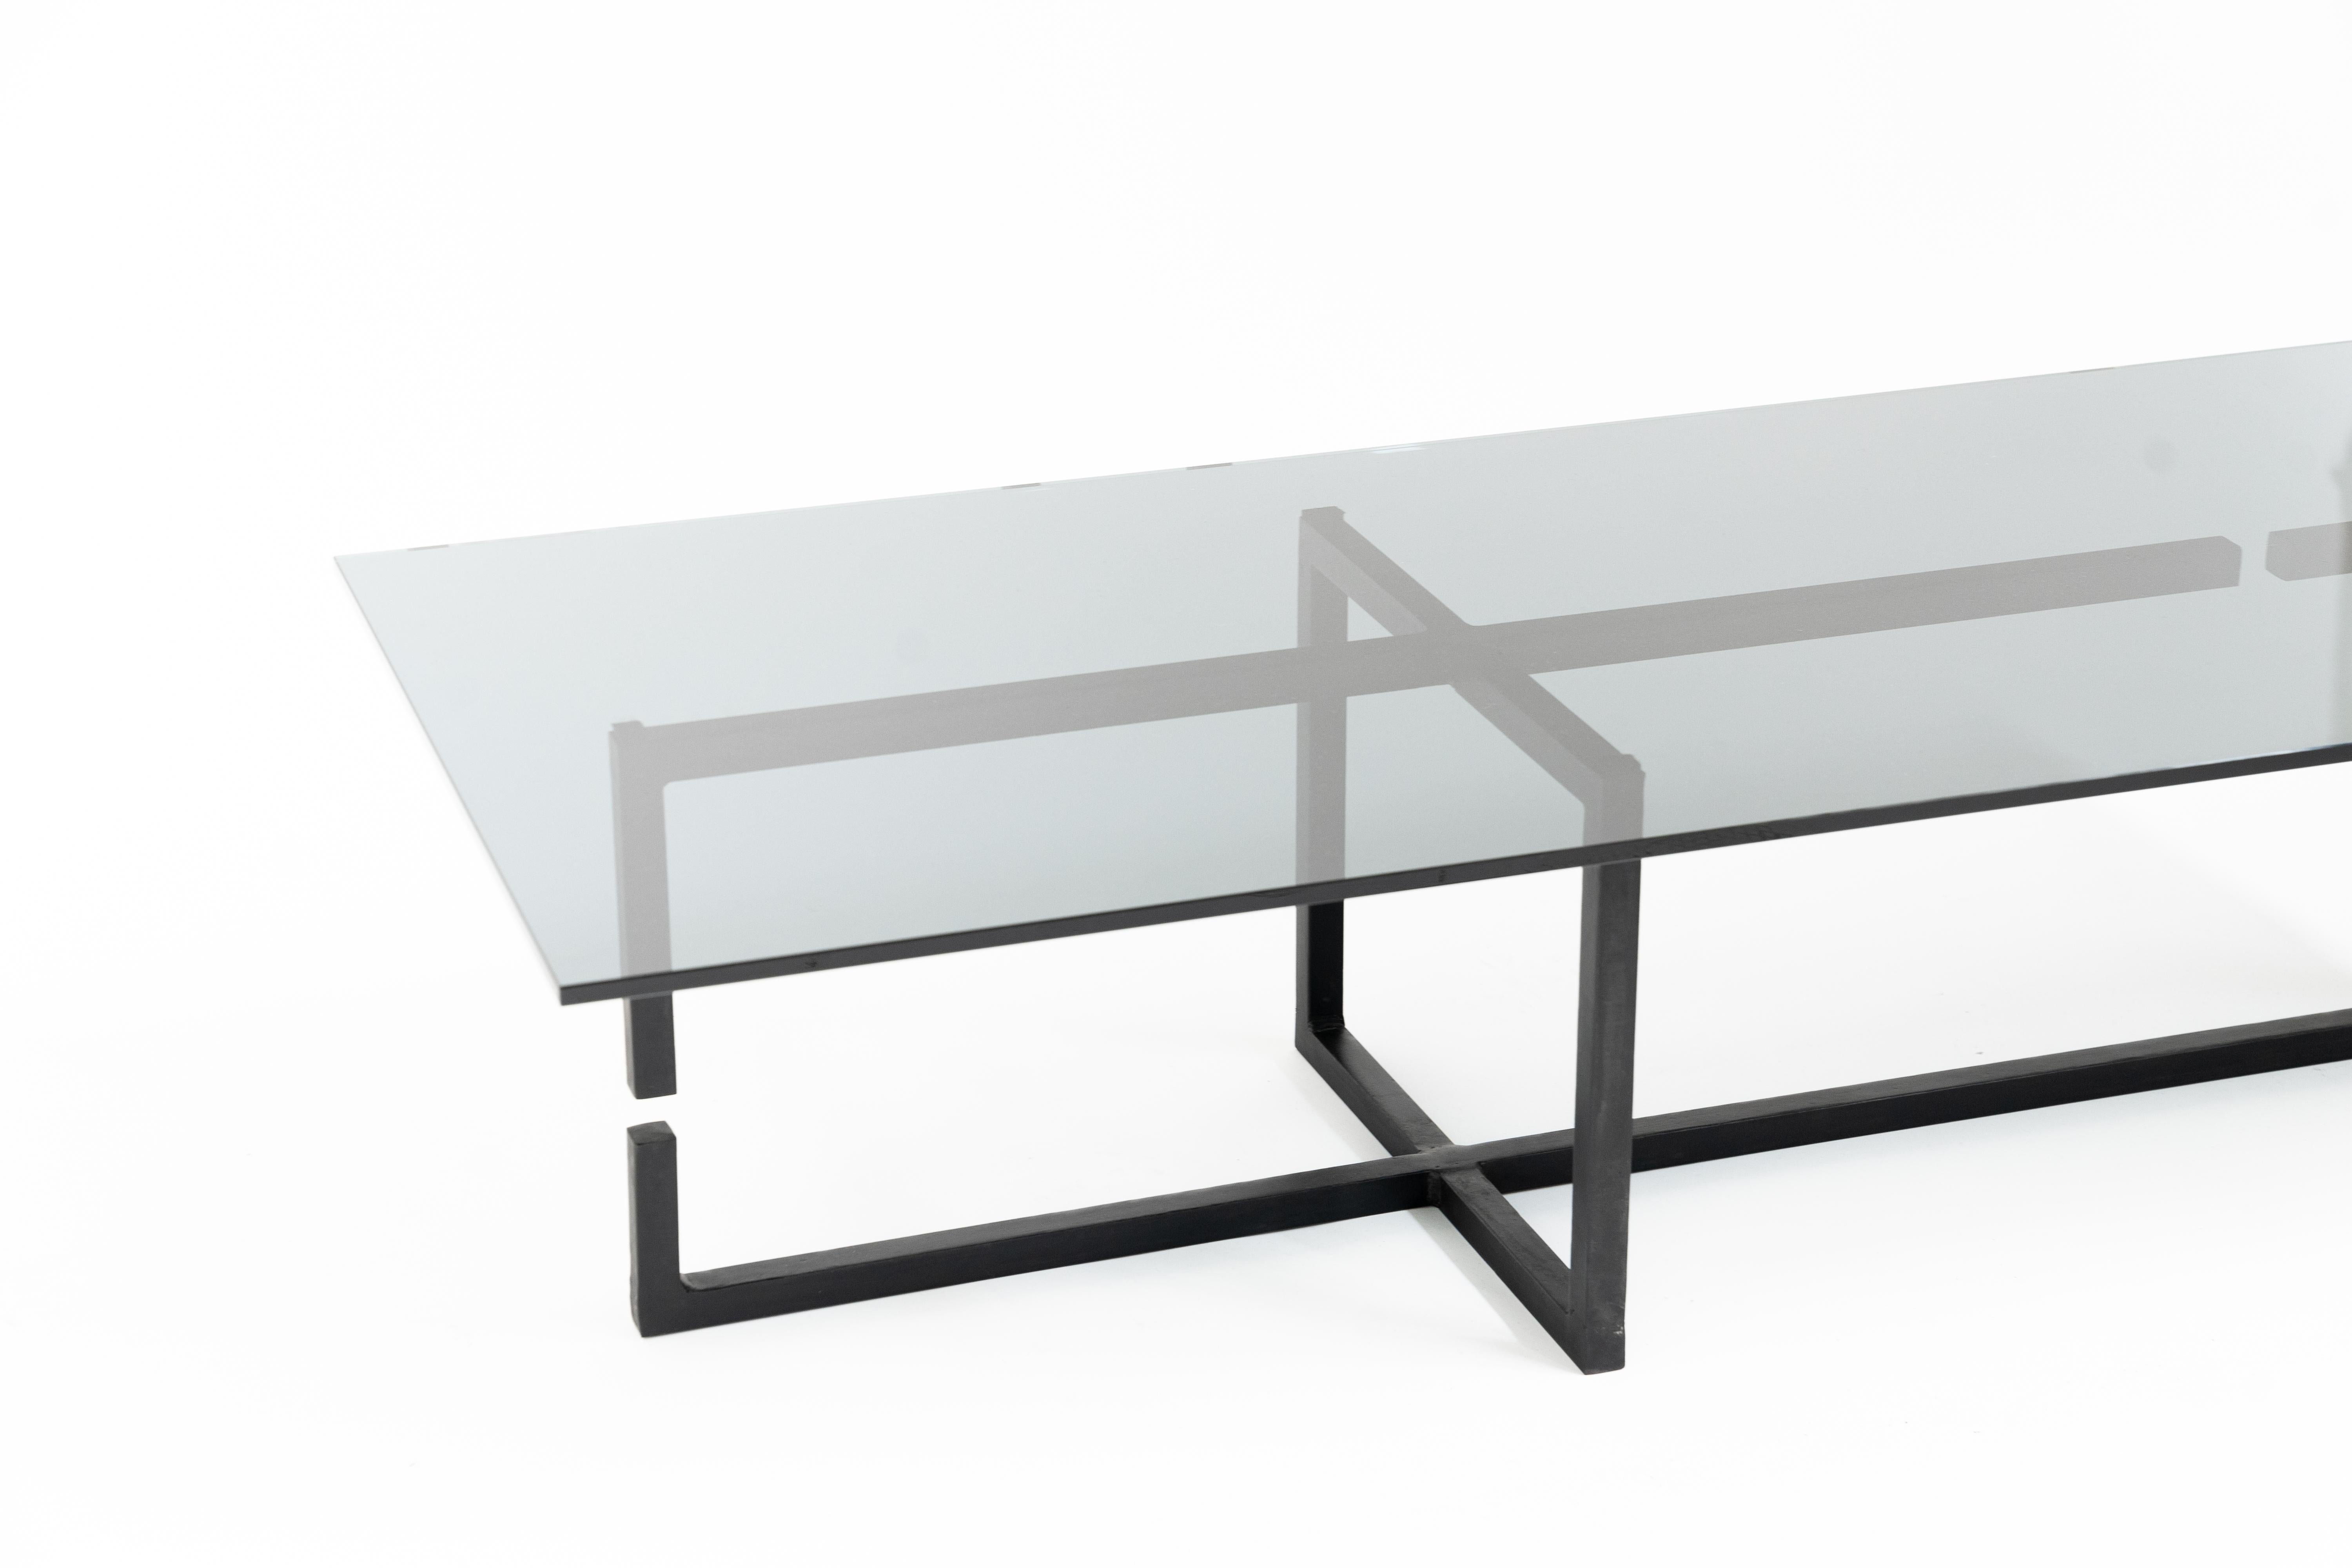 Contemporary Coffee Table Modern Dynamic Gap Blackened Steel Waxed Finish Smoked Grey Glass 